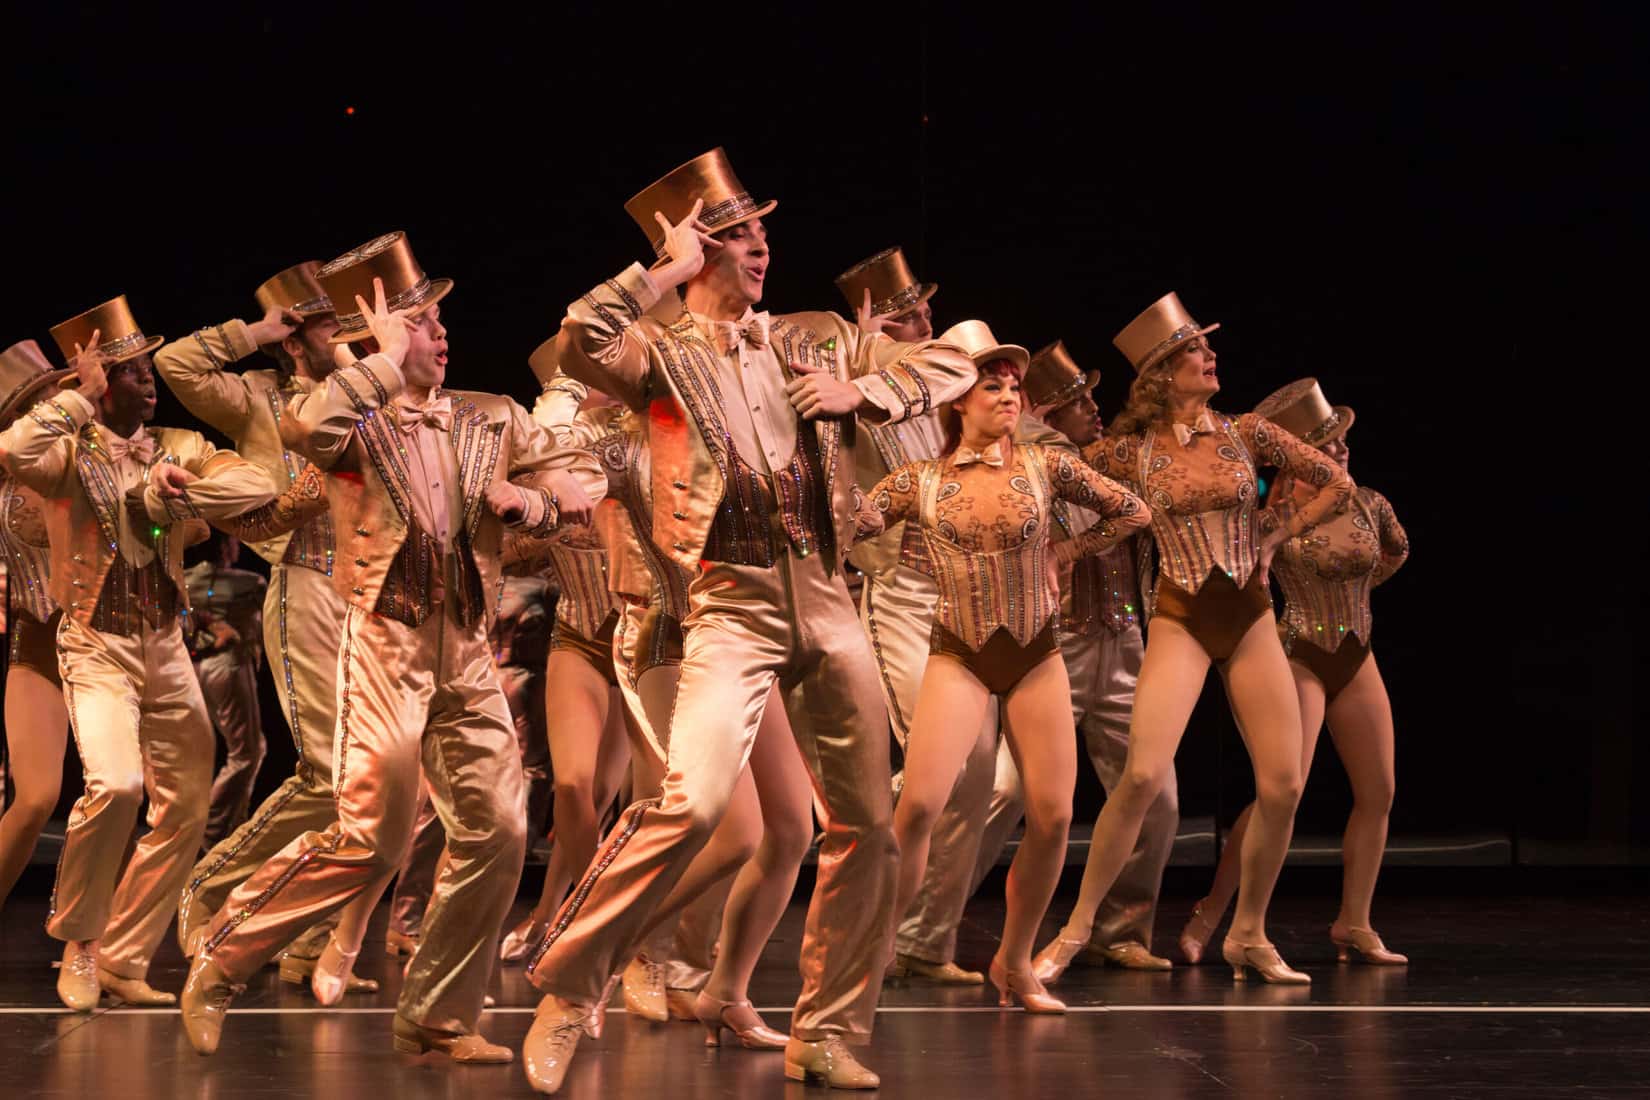 Broadway musical 'A Chorus Line' to conclude San Francisco Playhouse